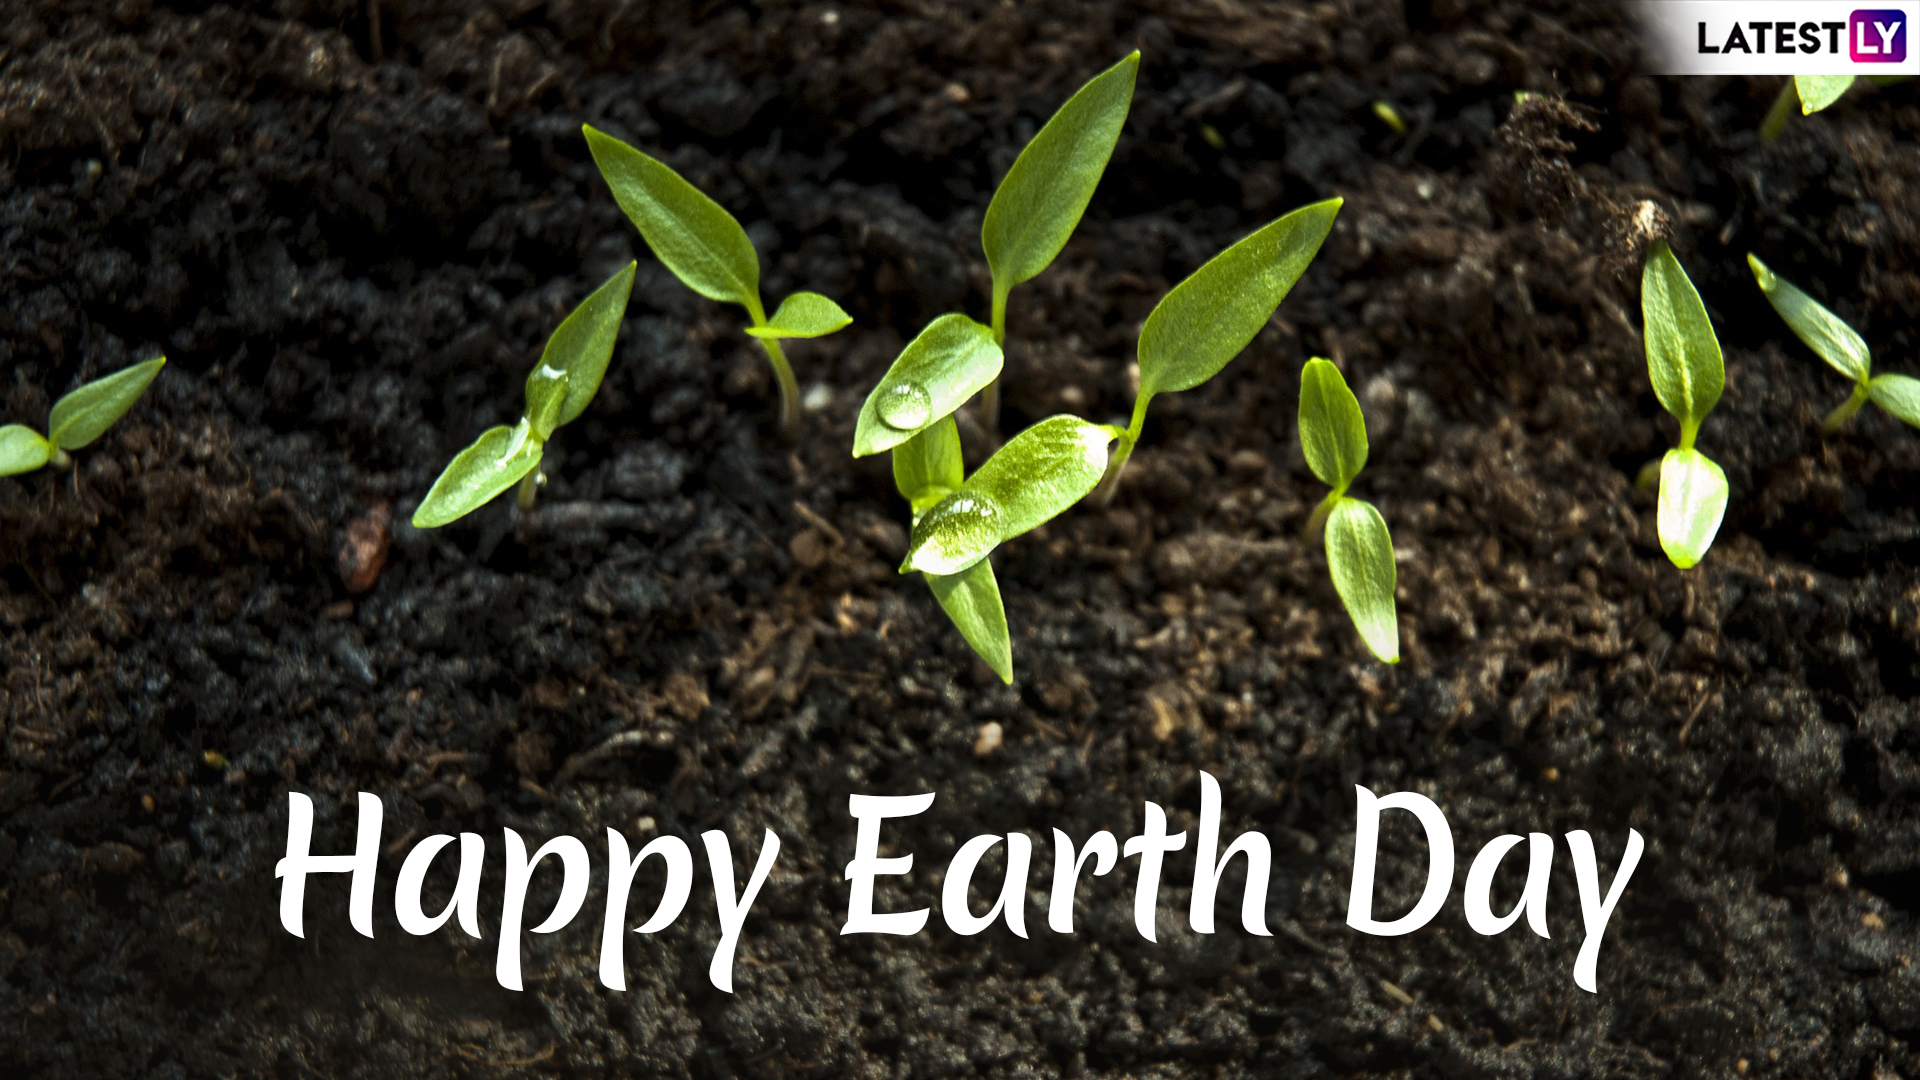 Earth Day Image HD Wallpaper For Online